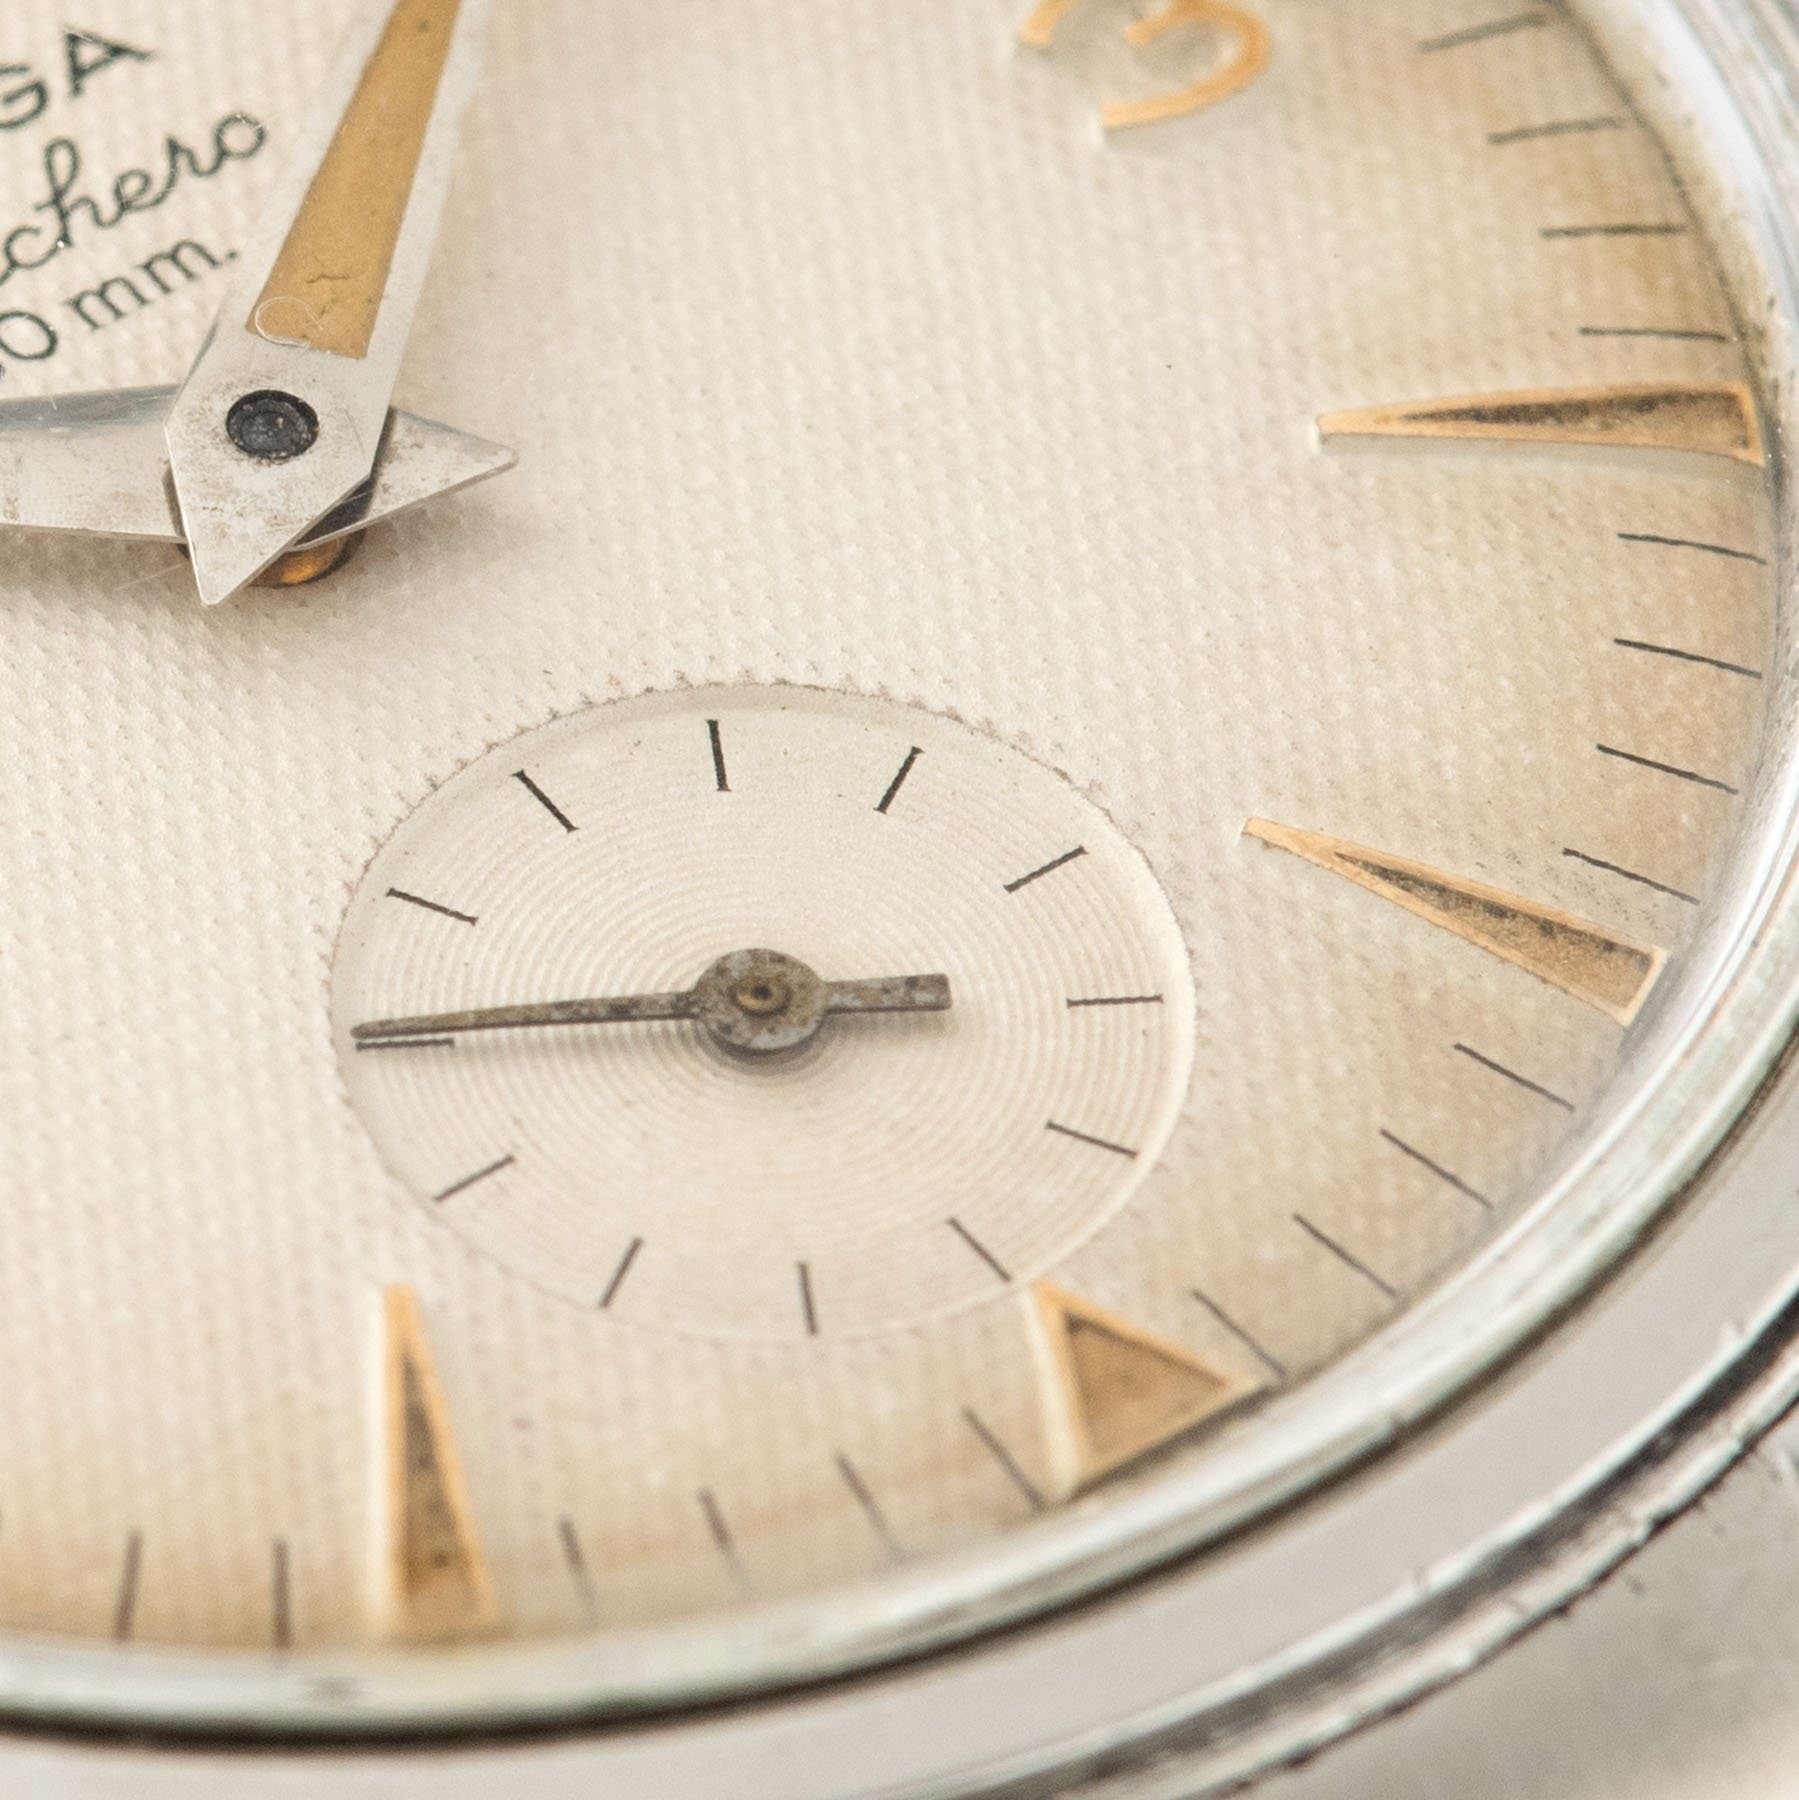 Omega Ranchero White Waffle Dial 2990 with Archive Extract